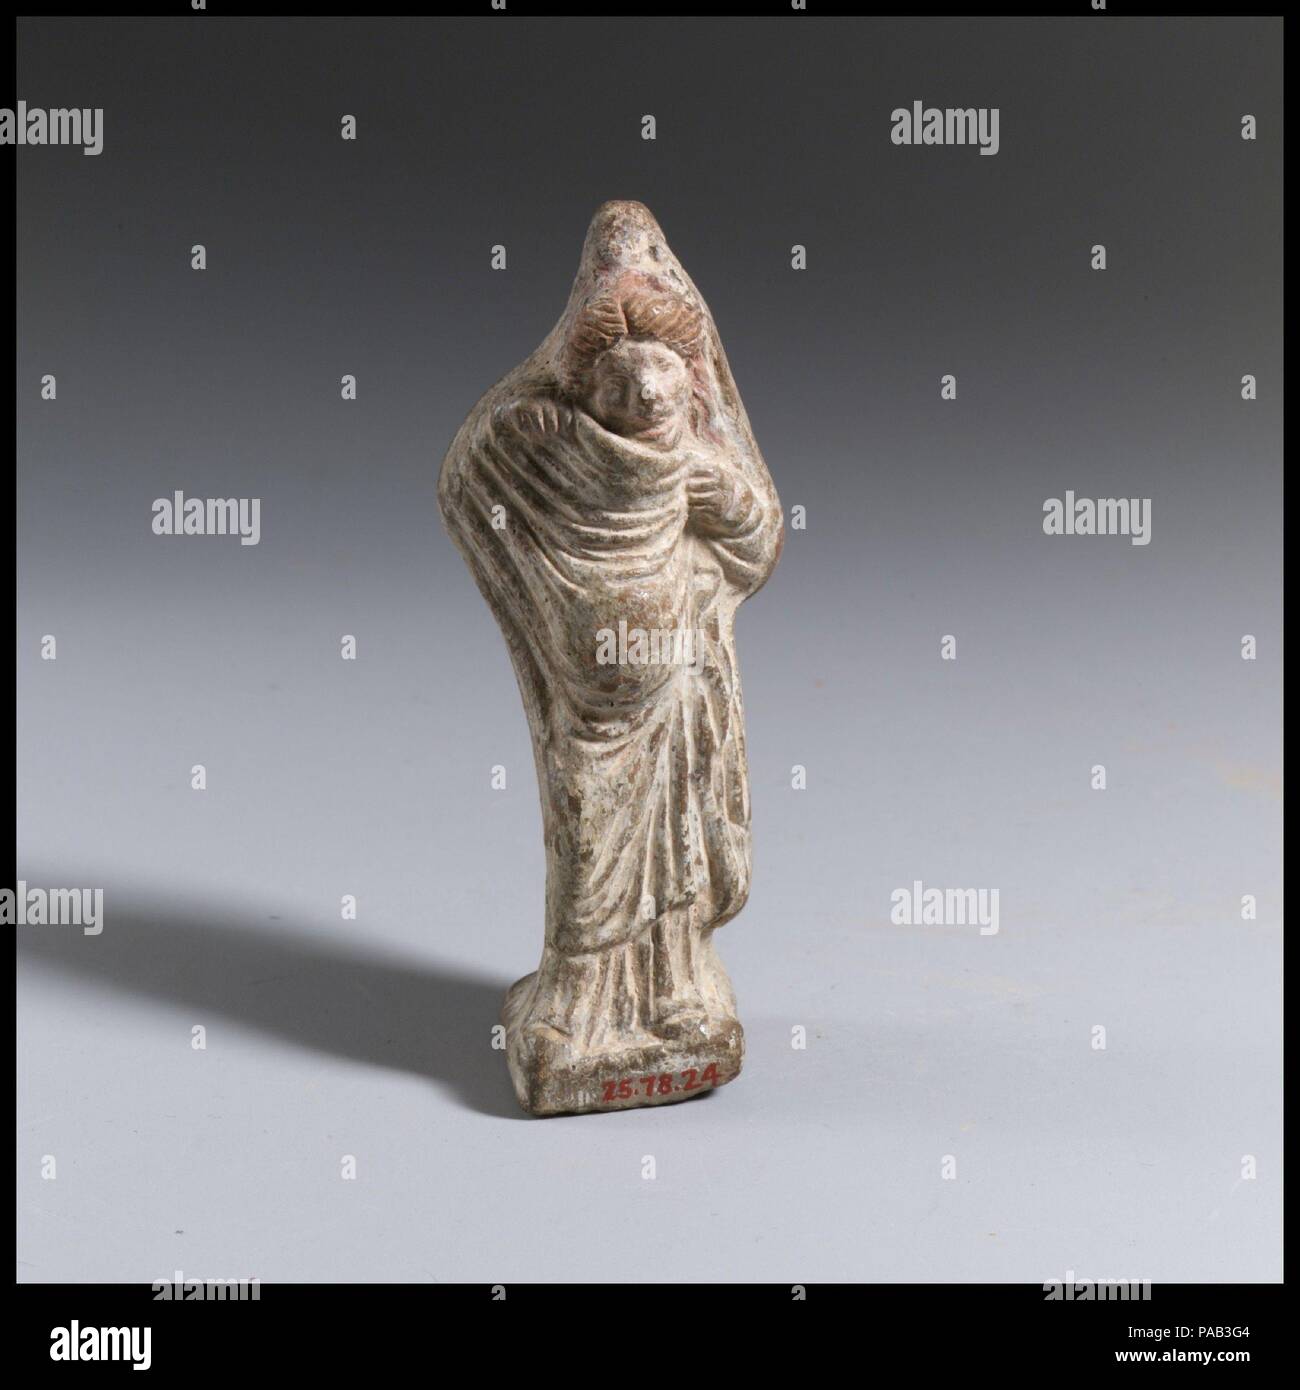 Statuette of an actor. Culture: Greek. Dimensions: H. 3 7/16 in. (8.7 cm). Date: mid-4th century B.C.. Museum: Metropolitan Museum of Art, New York, USA. Stock Photo